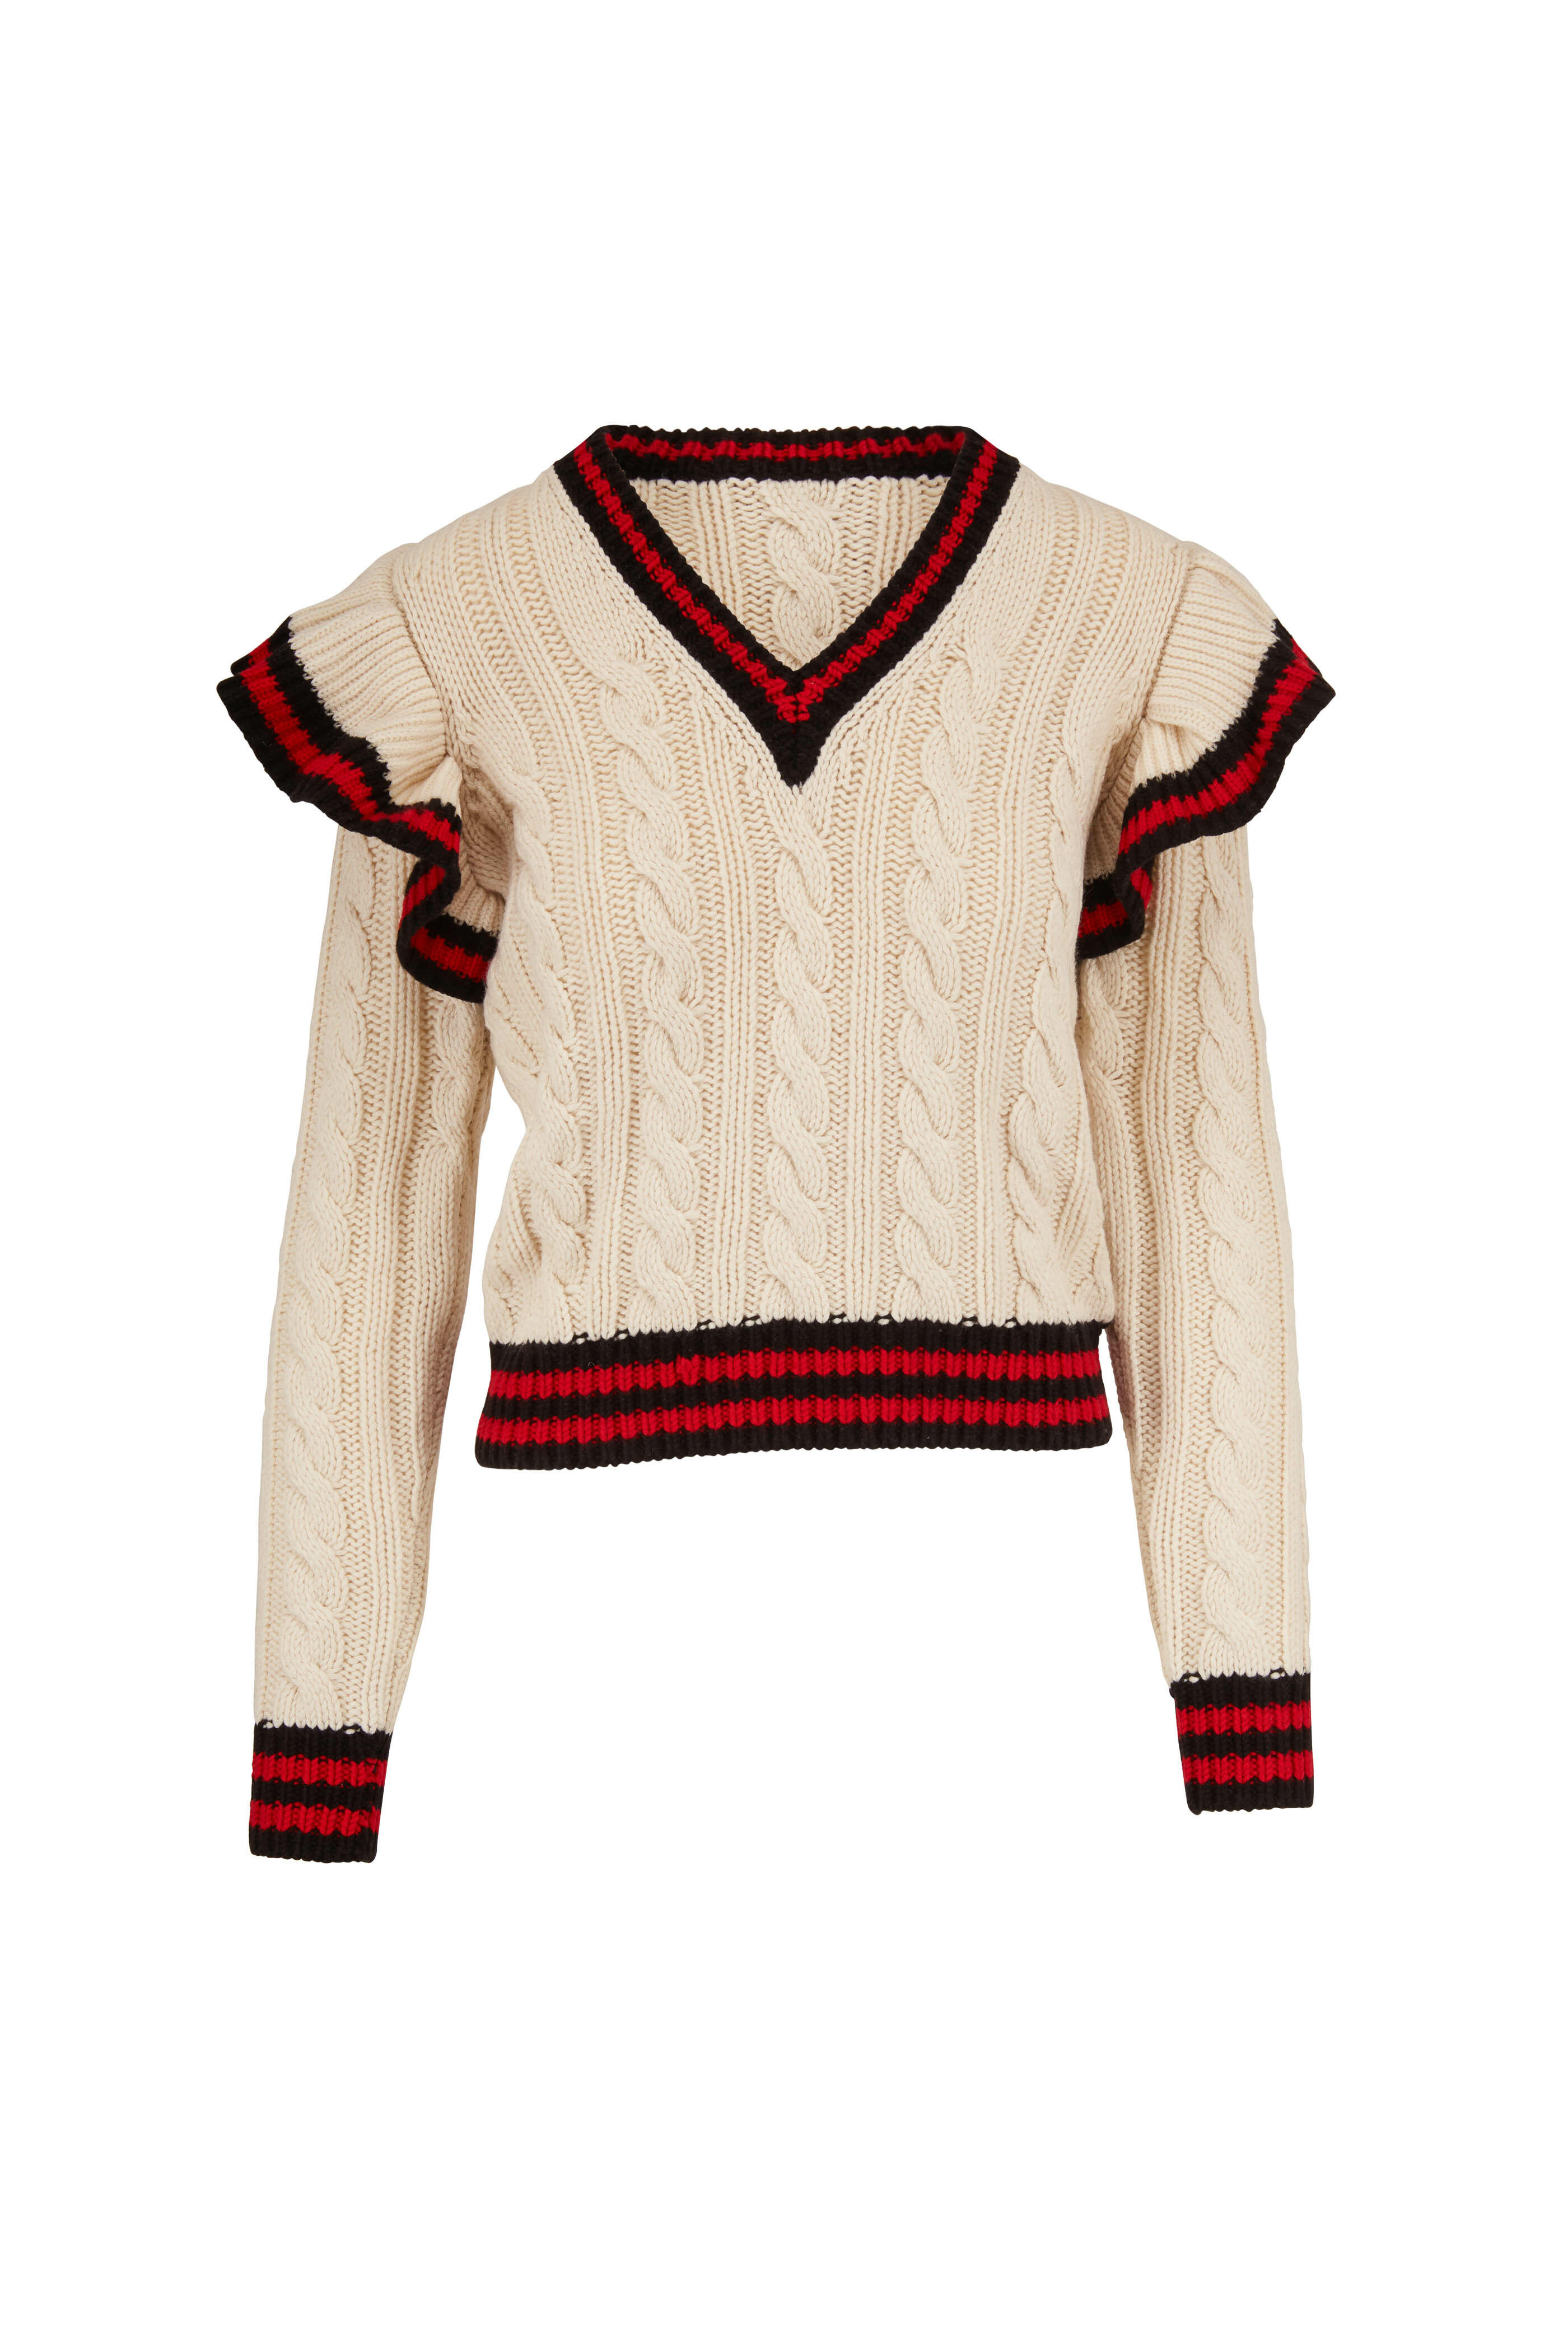 Grillo Explícito Betsy Trotwood Michael Kors Collection - Corralina Ivory & Crimson Cashmere Sweater